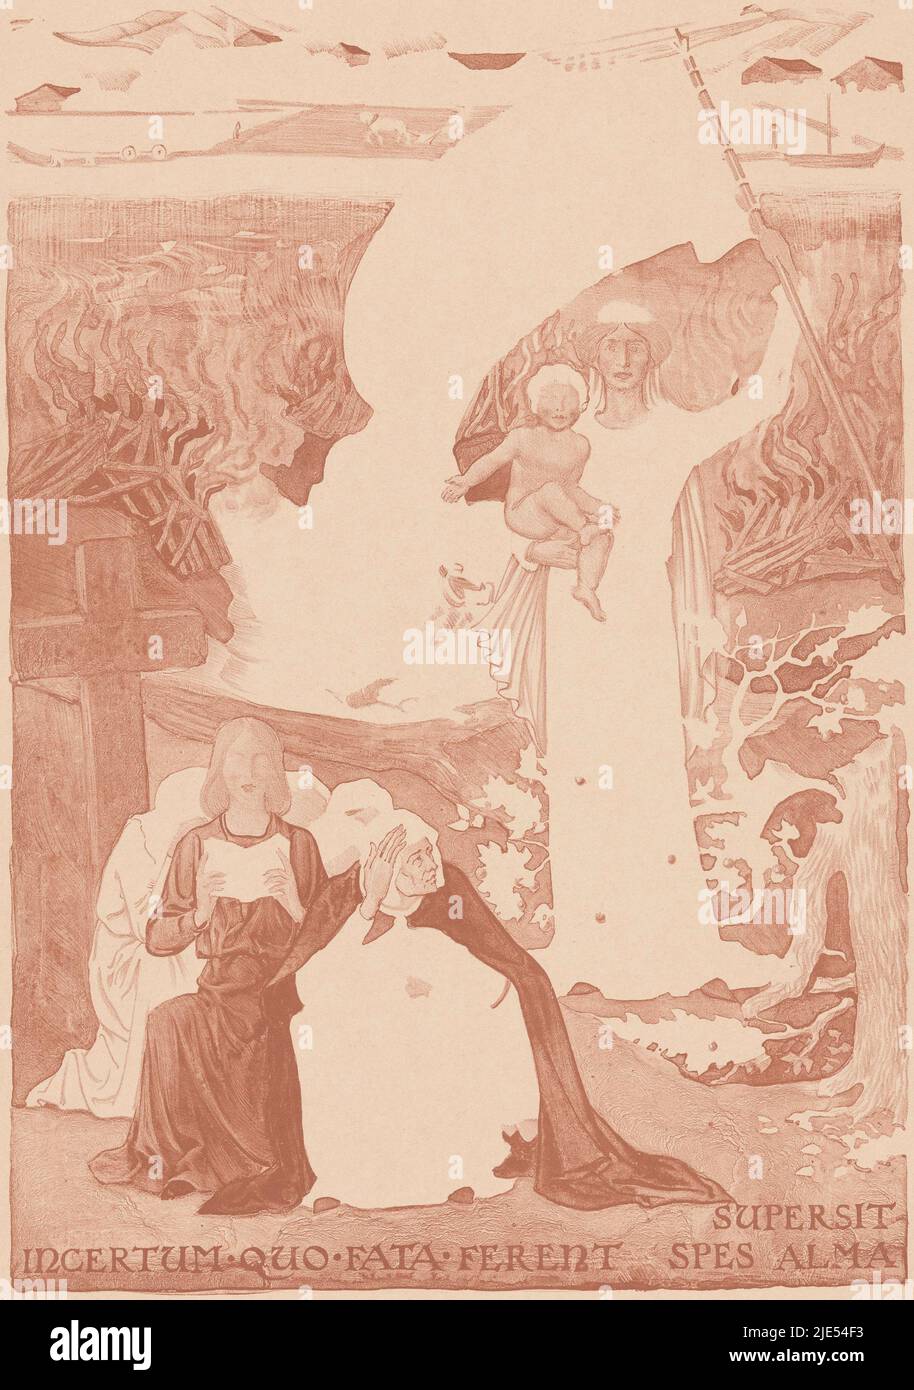 A woman with a child in her arms is holding a banner with an anchor symbolising hope. She is in a devastated and burning area. At her feet lies a snapped tree with fruits. In the foreground on the left, a group of women are squatting in front of a cross. In the background a Transvaal landscape with farmers. At the top the inscription 'Spes nostra Deus' (God is our hope), at the bottom the inscription 'Incertum quo fata ferent spes alma supersit' (uncertain is where fate will take us, may hope remain)., Transvaal print, print maker: Antoon Derkinderen, 1902, paper, h 432 mm × w 323 mm Stock Photo